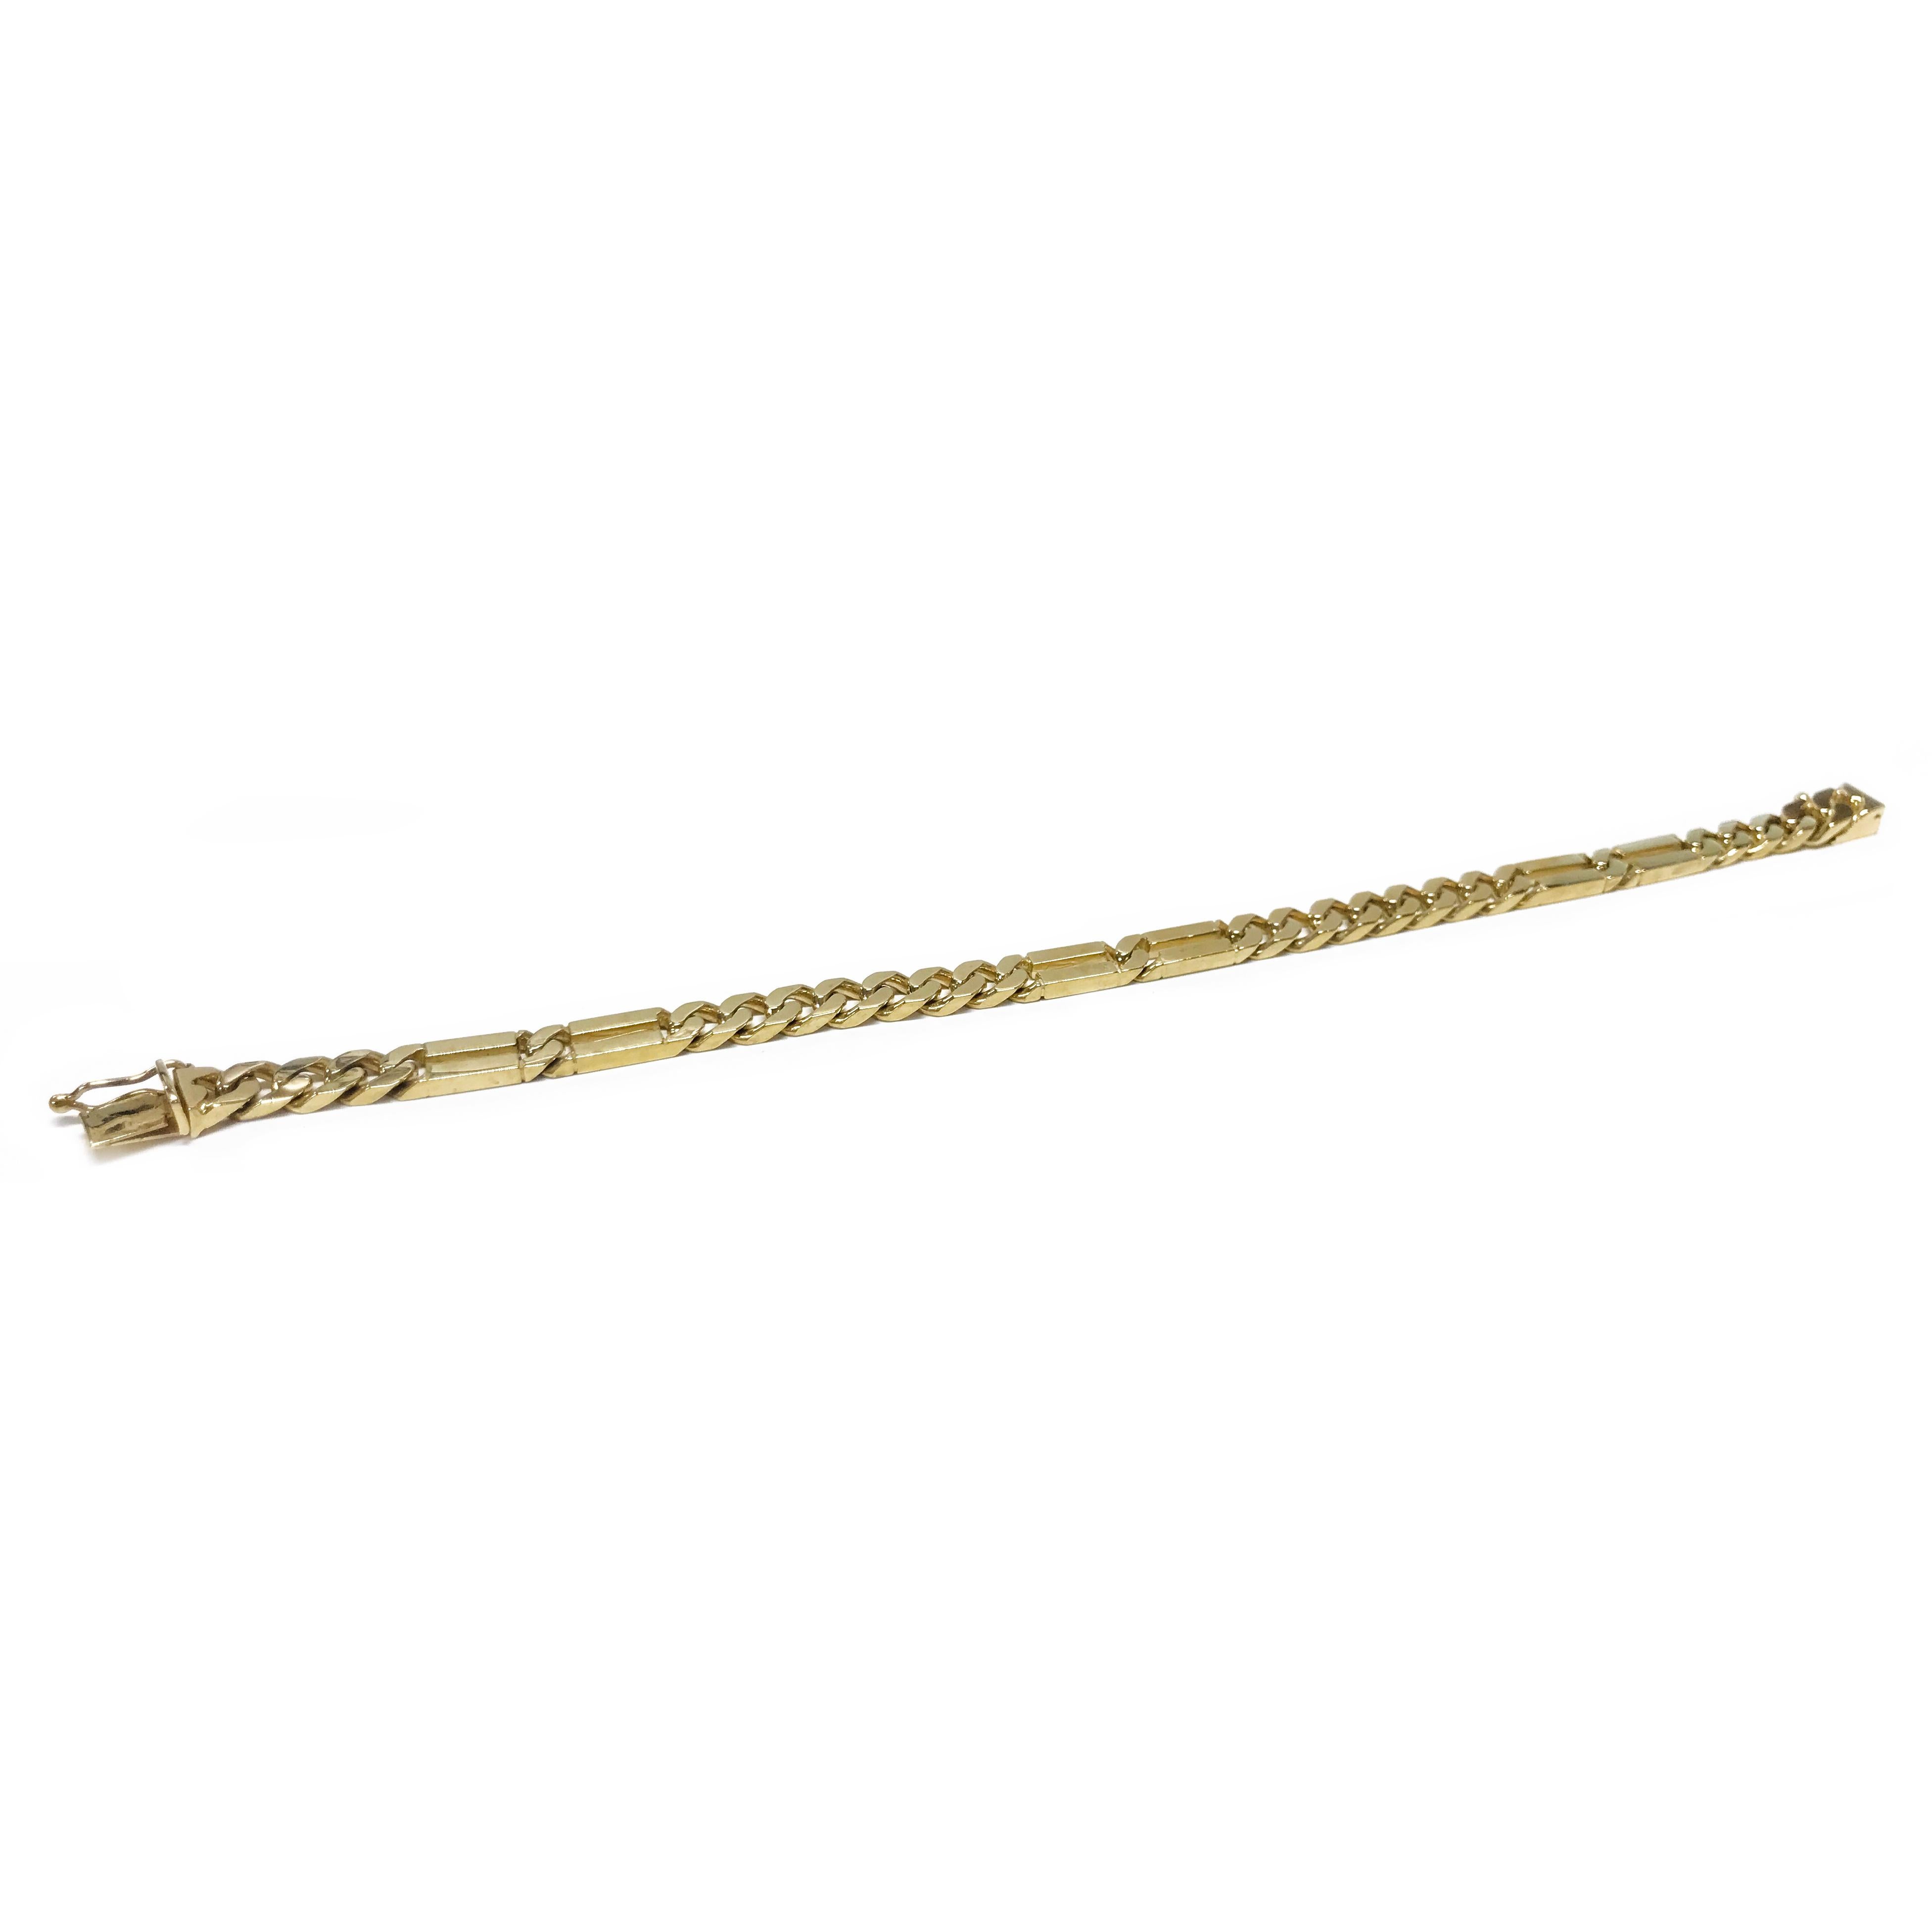 14 Karat Flat-Figaro Link Bracelet. This classic bracelet features 6mm flat-Figaro links. The top of the long links is a shiny finish while the bottom is a matte finish, the shorter links are shiny all around. The bracelet is 8